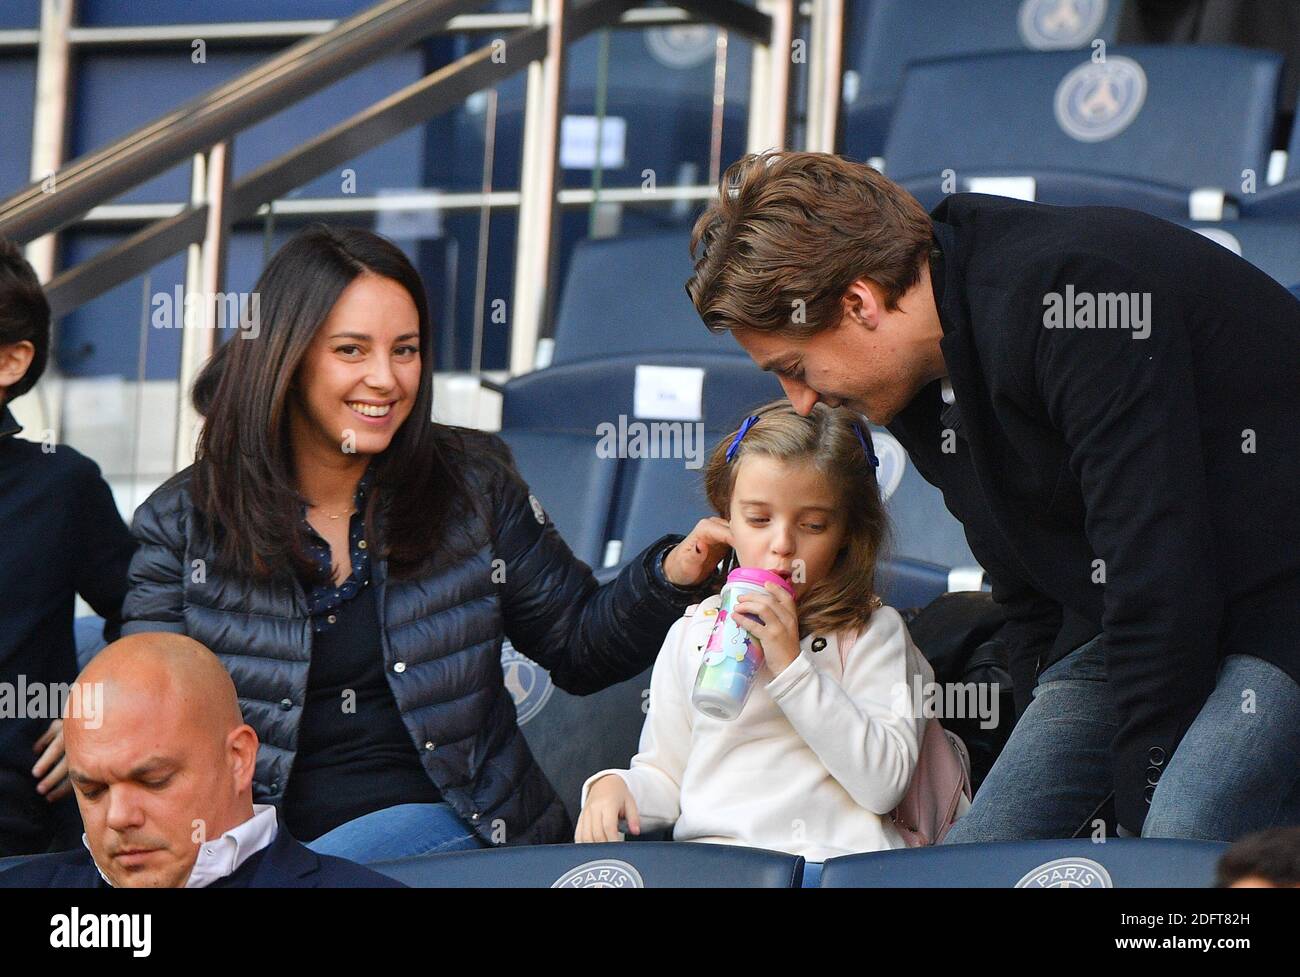 Please hide children's faces prior to the publication - Jean Sarkozy with  his Jessica and children Solal and Lola during the Ligue 1 Paris  Saint-Germain (PSG) v Amiens football match at the